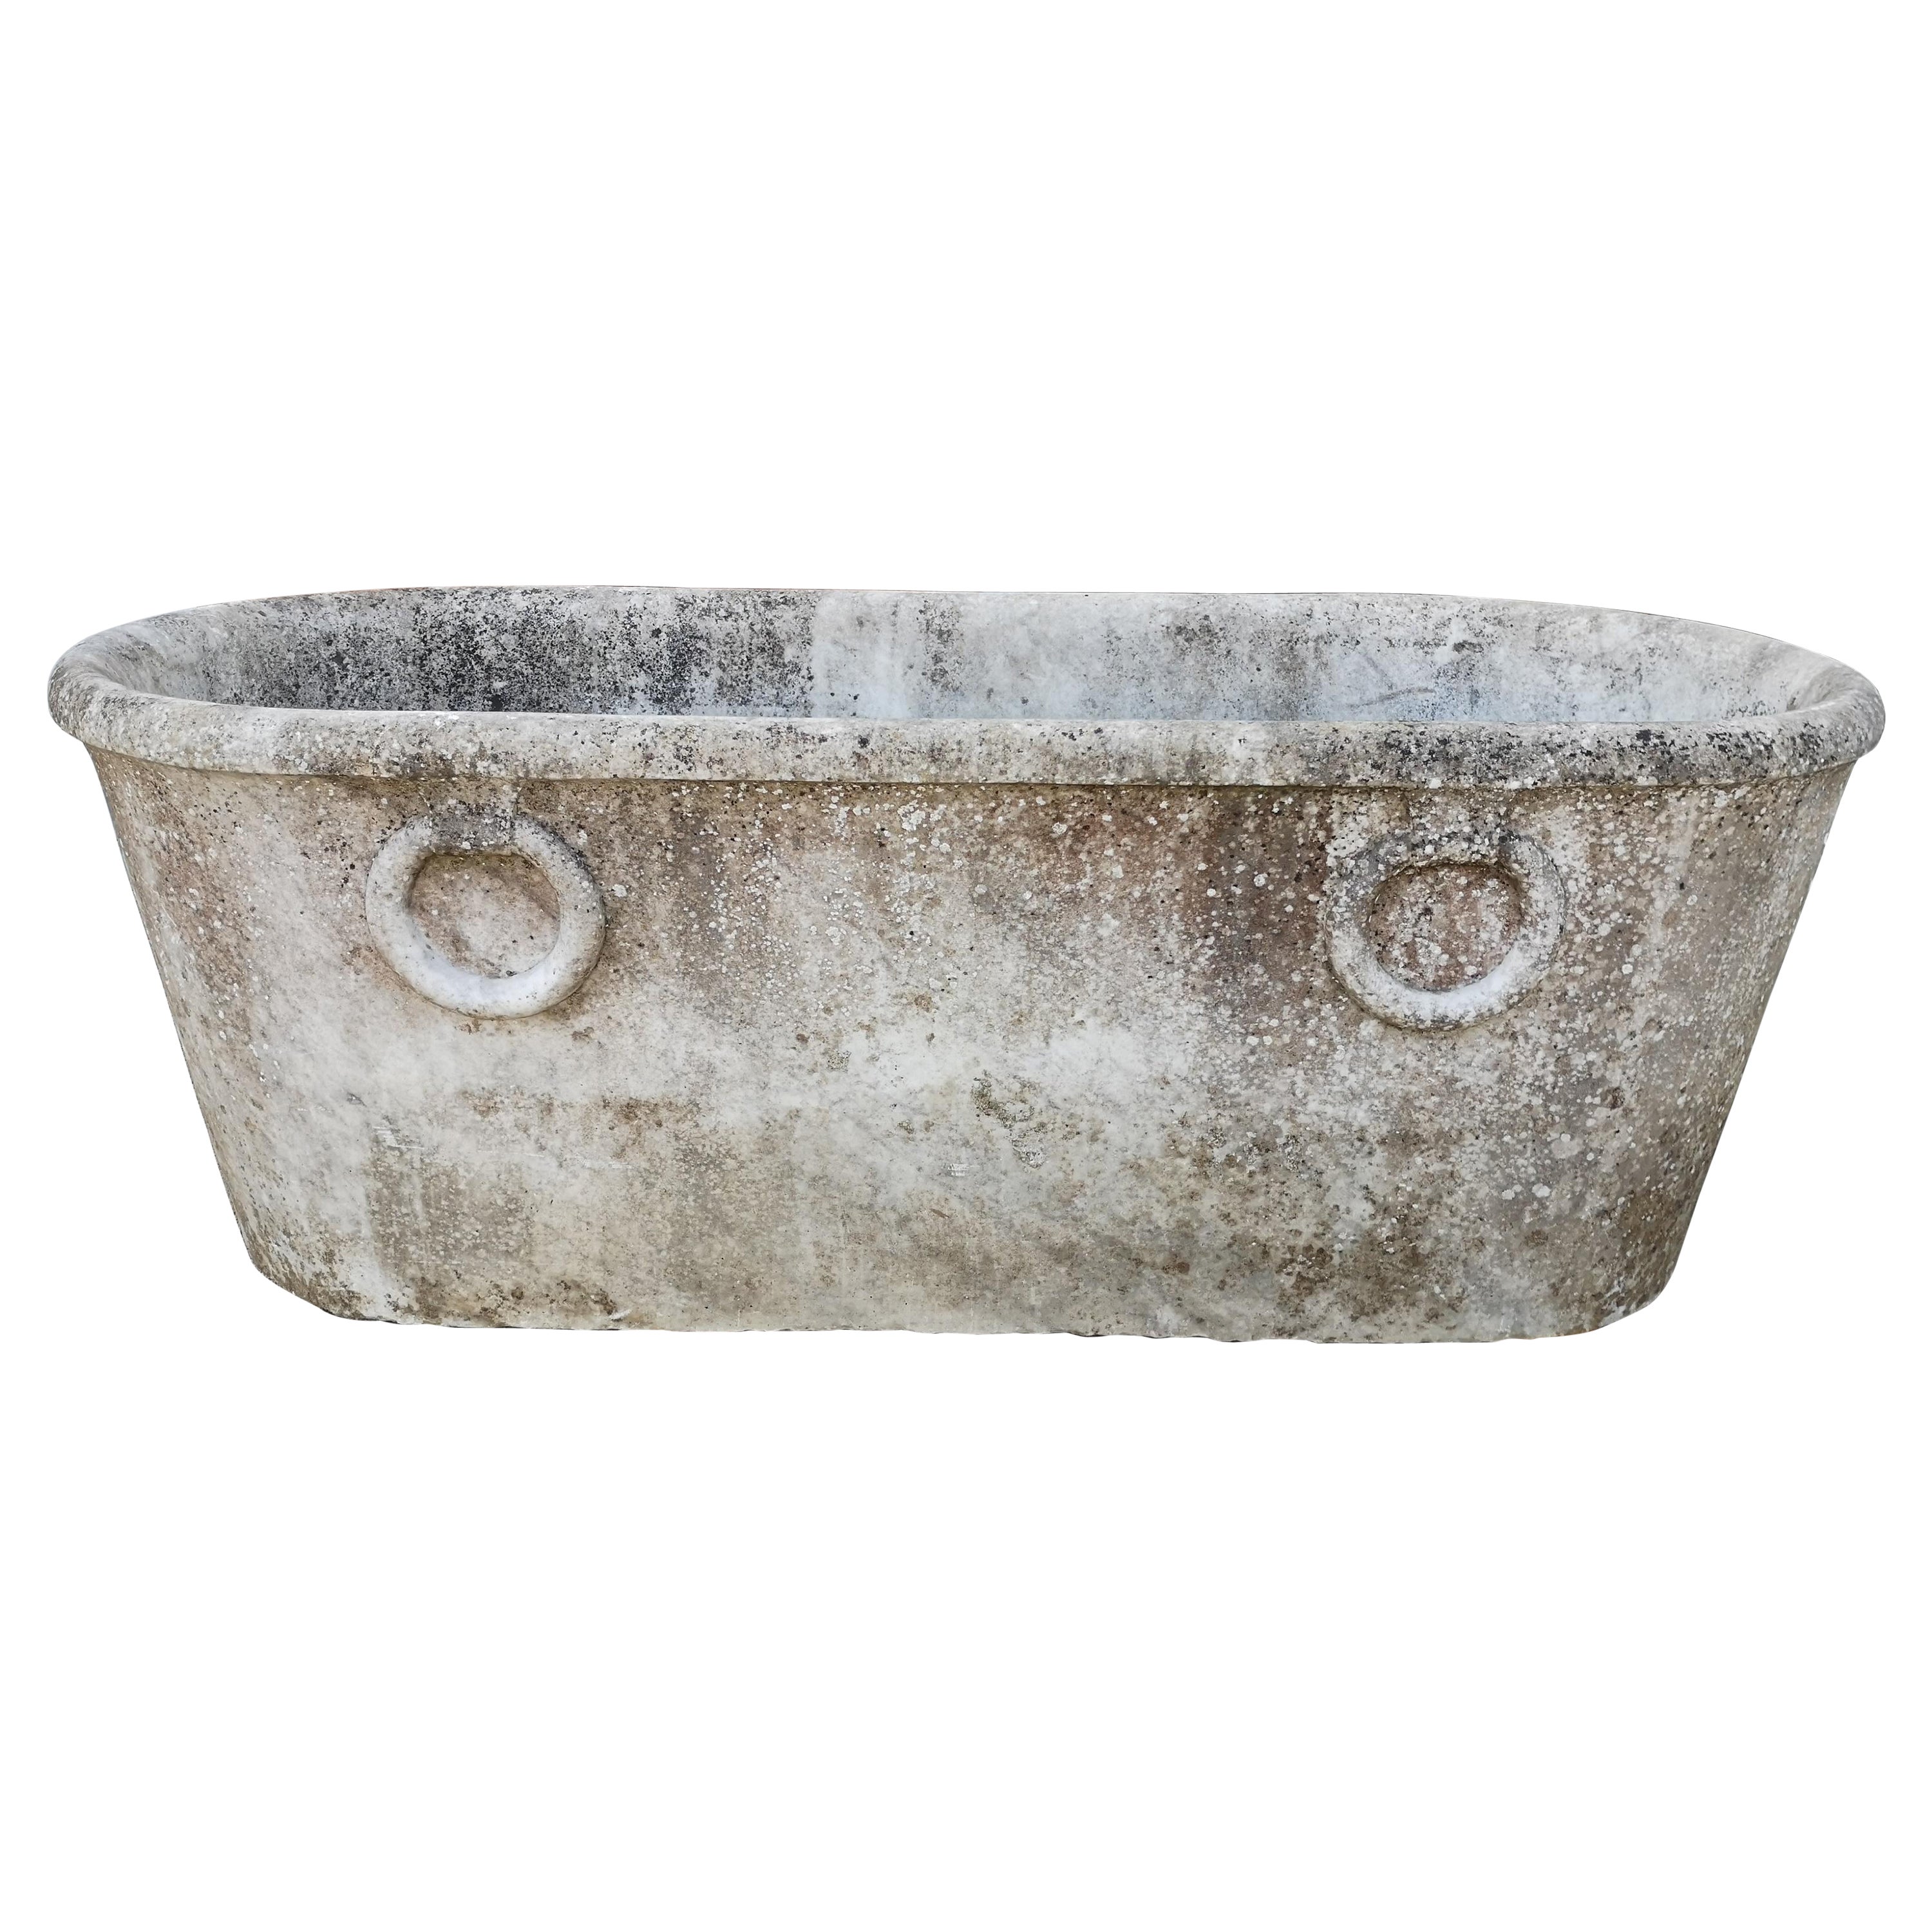 19th Century Spanish Handcarved Marble Bath w/ Rings